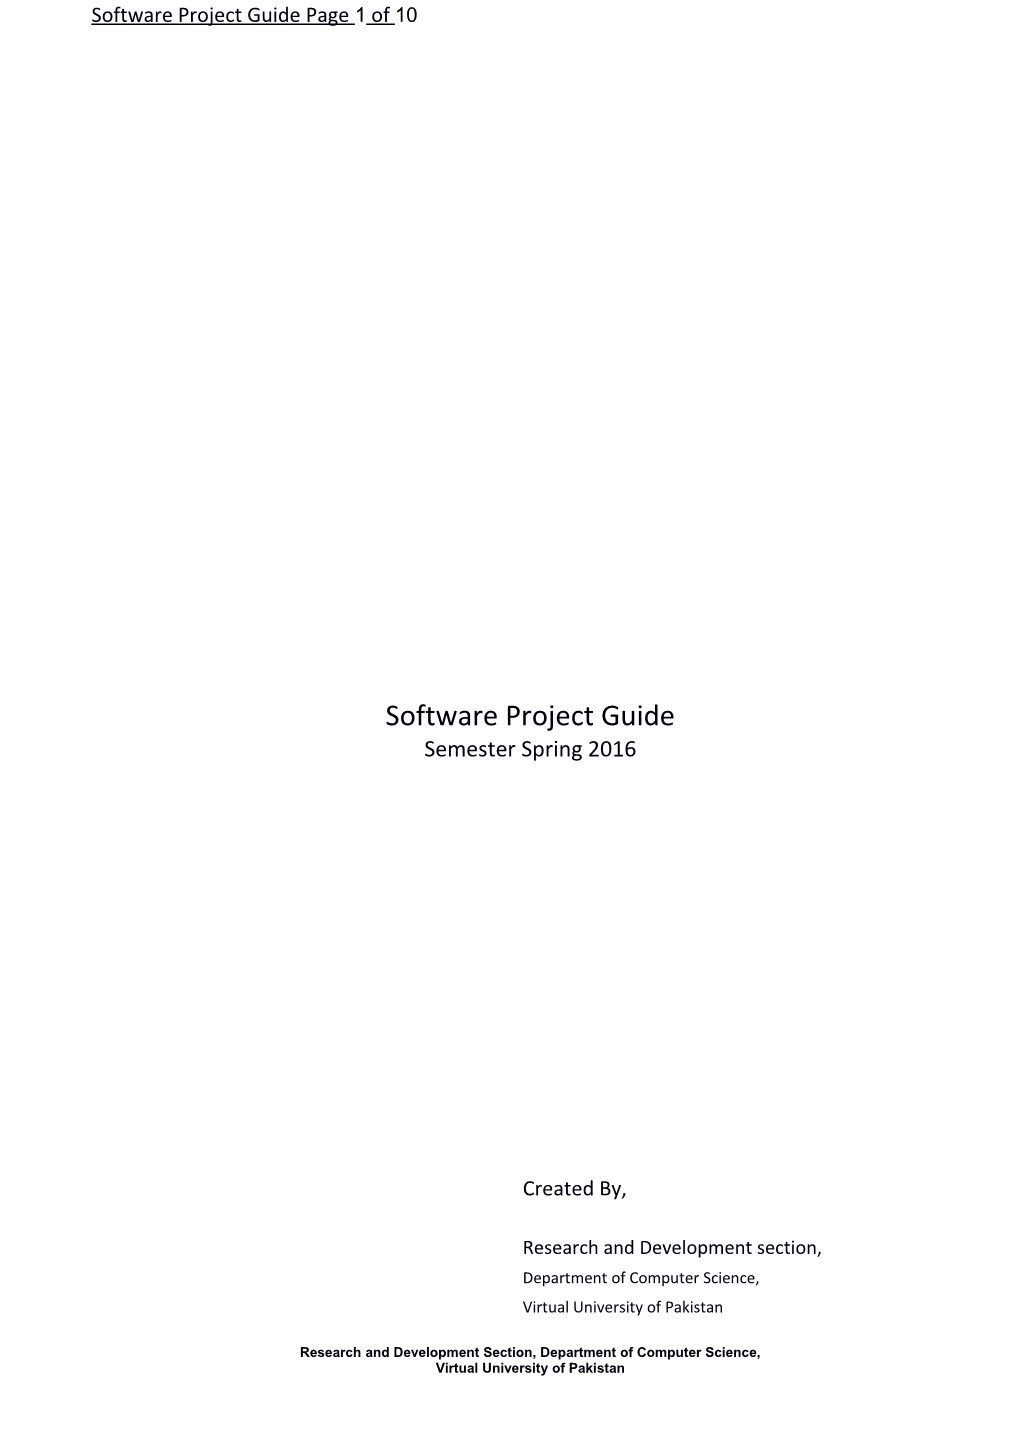 Software Project Guide Page 10 of 10 s1